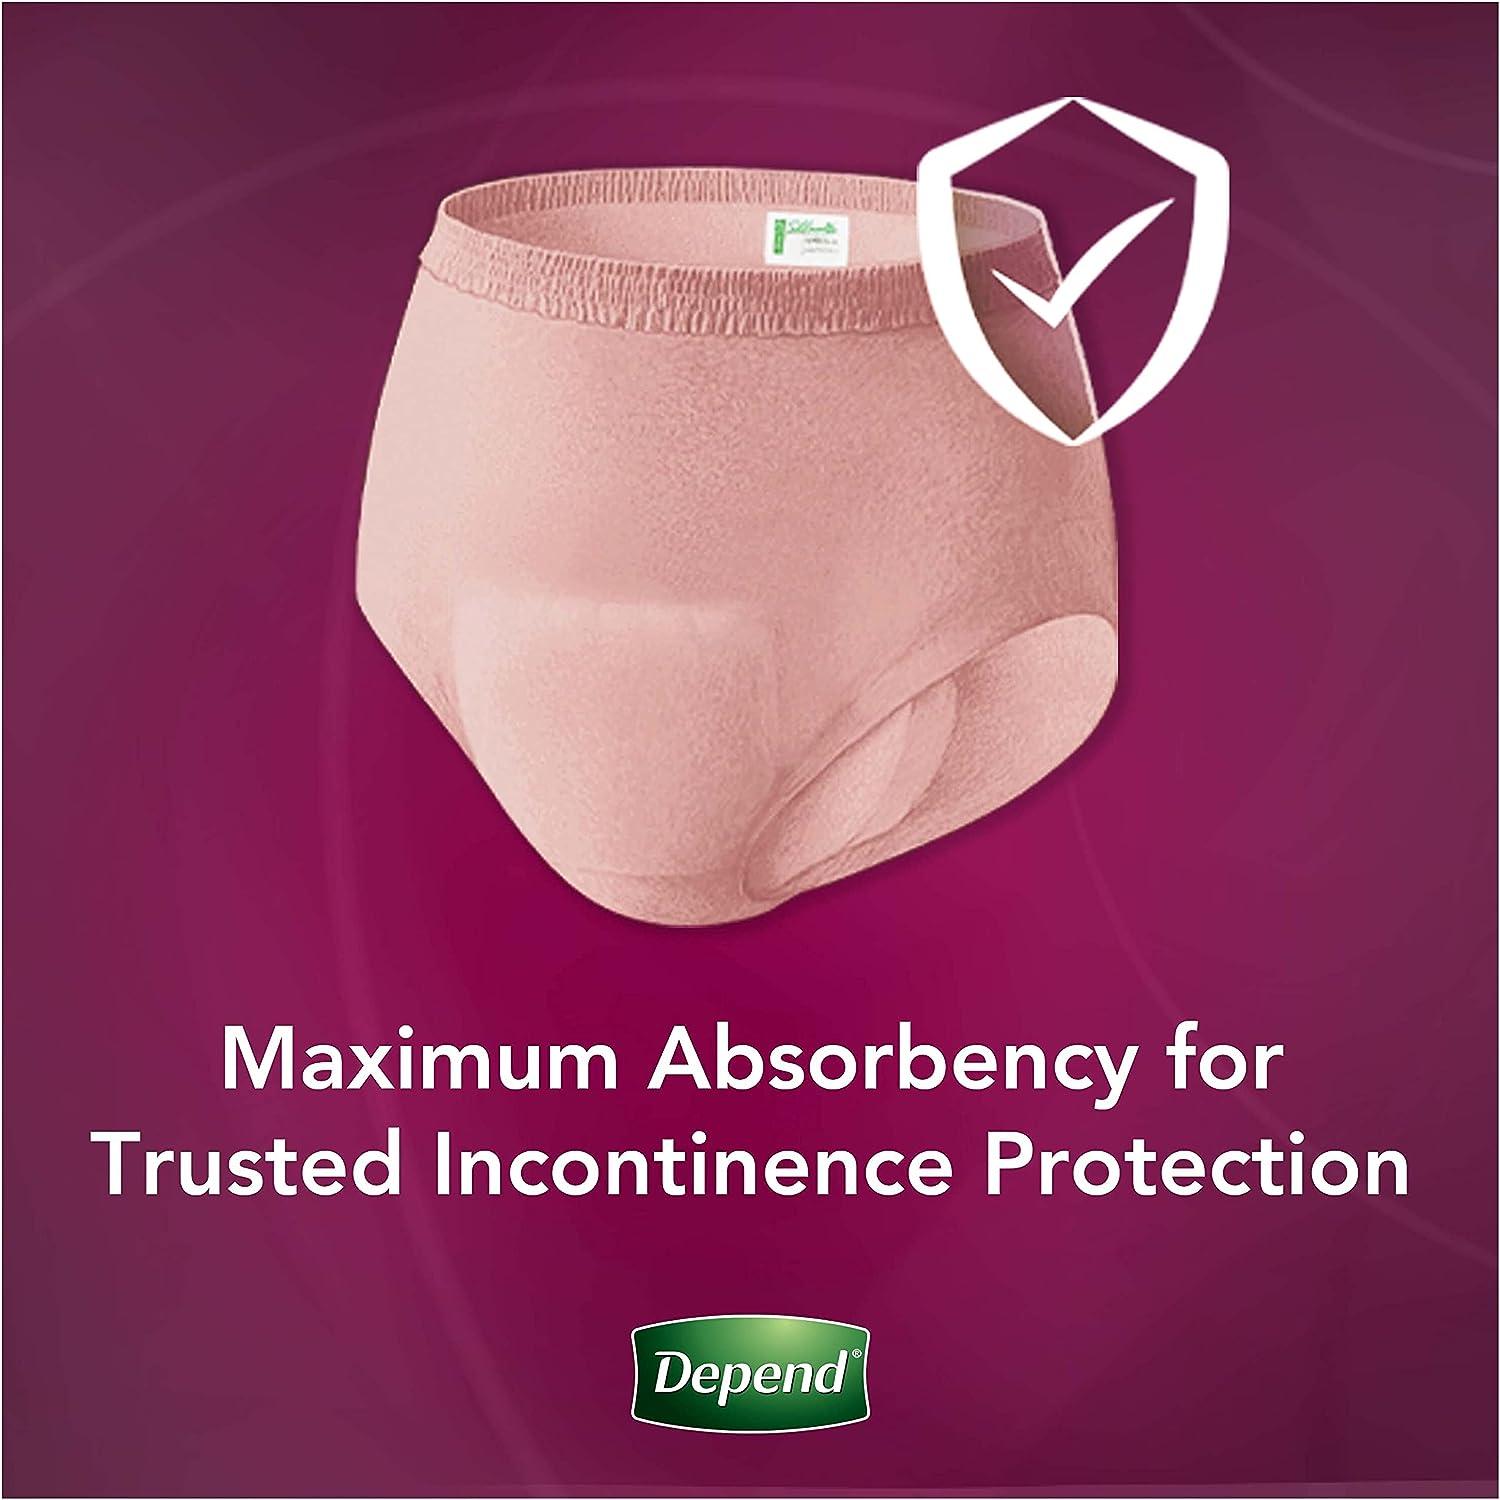 Sure Care brand size small/medium type depends for incontinence